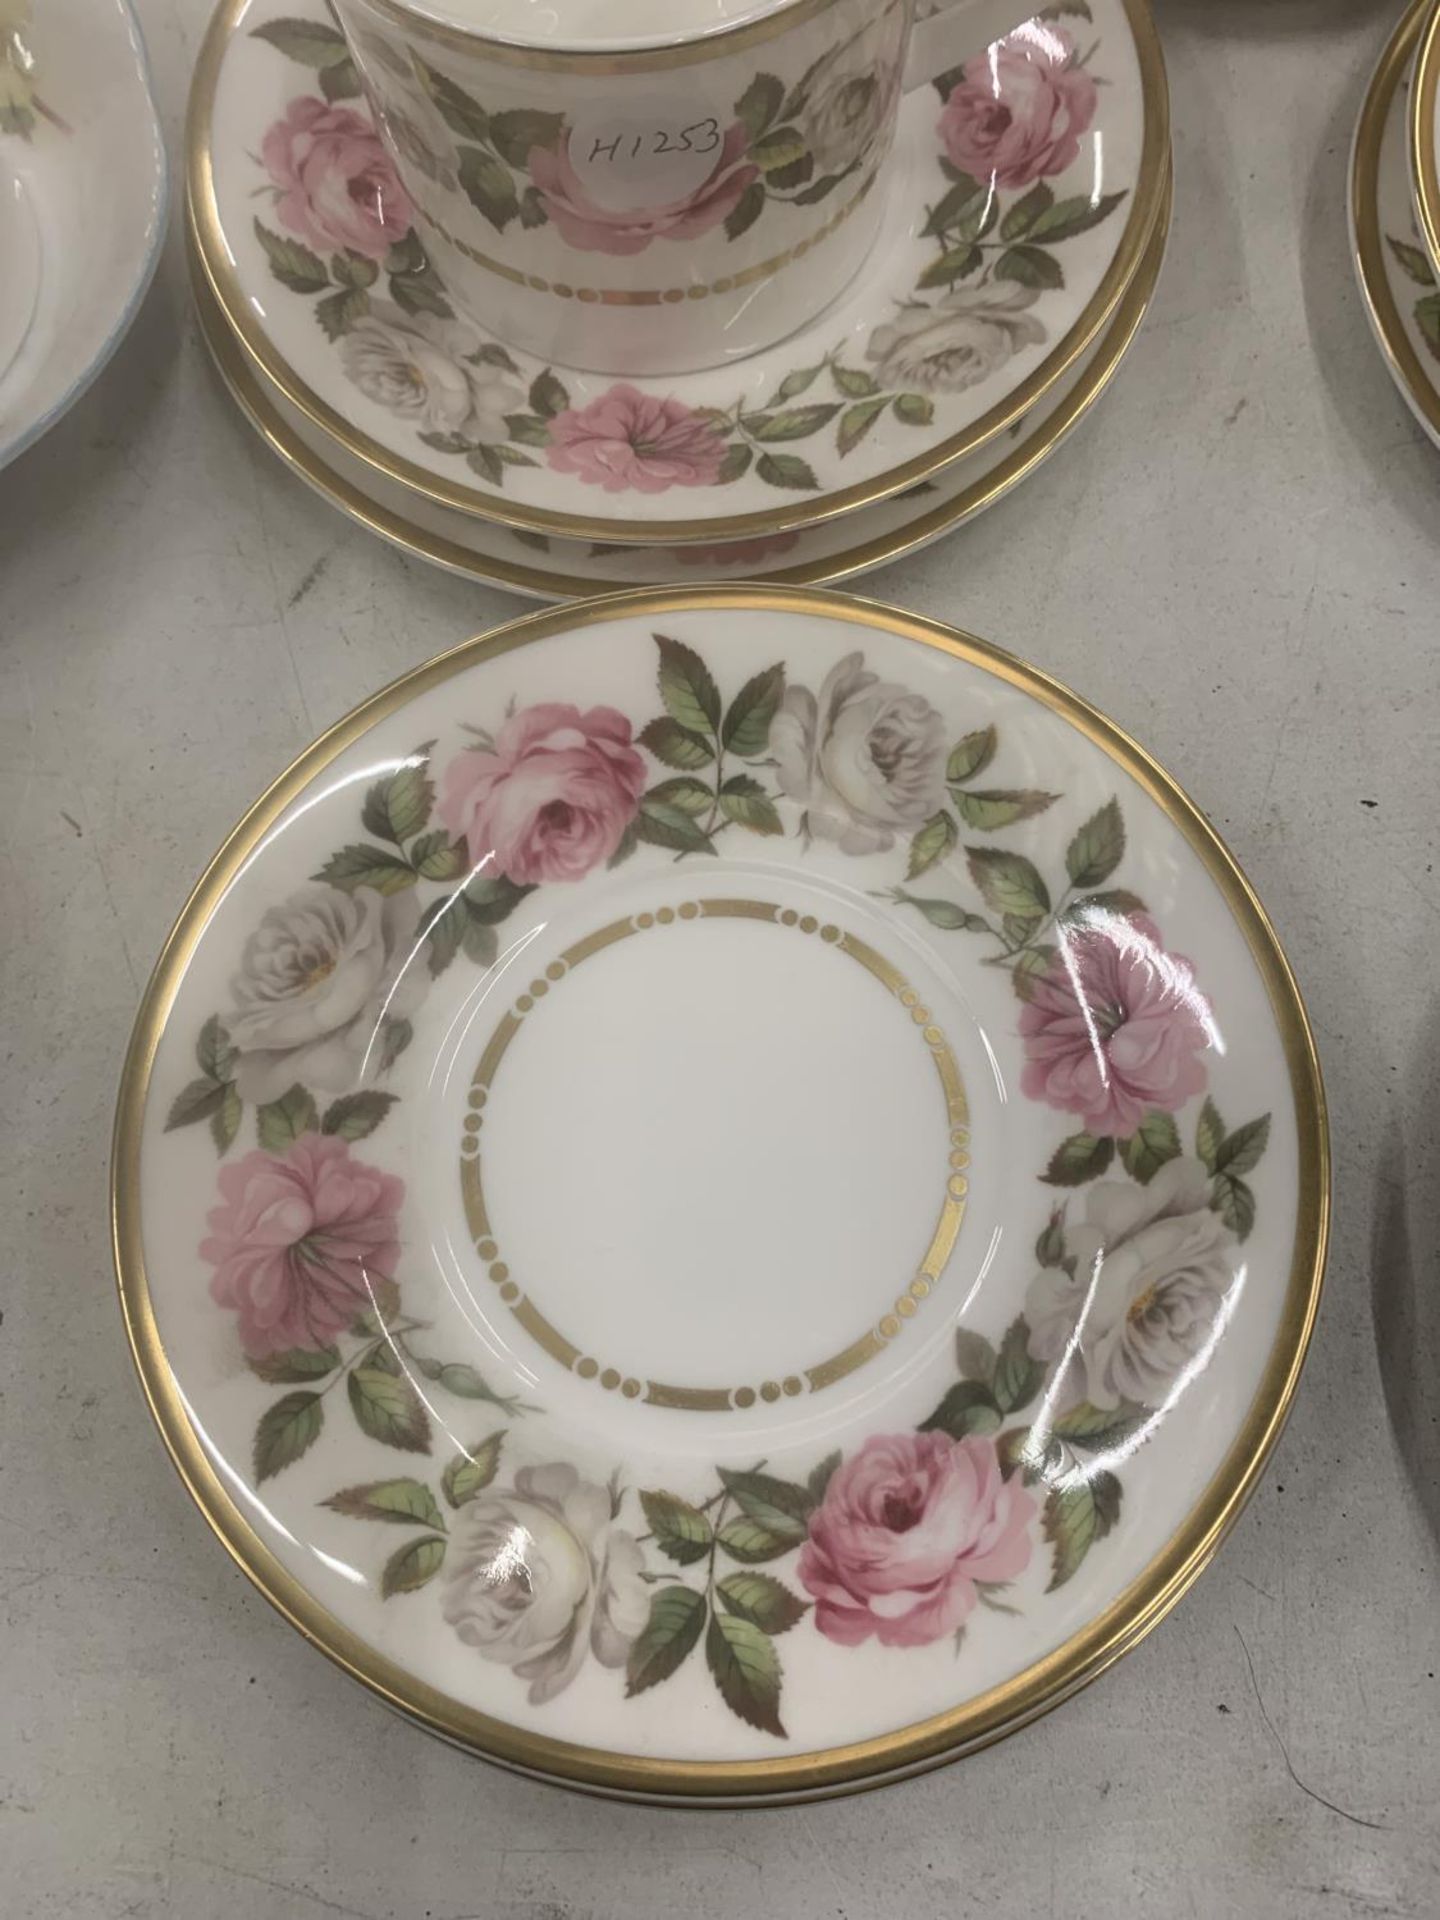 A ROYAL WORCESTER 'ROYAL GARDEN' TEASET TO INCLUDE A CAKE PLATE, CREAM JUG, SUGAR BOWL, CUPS, - Image 3 of 6